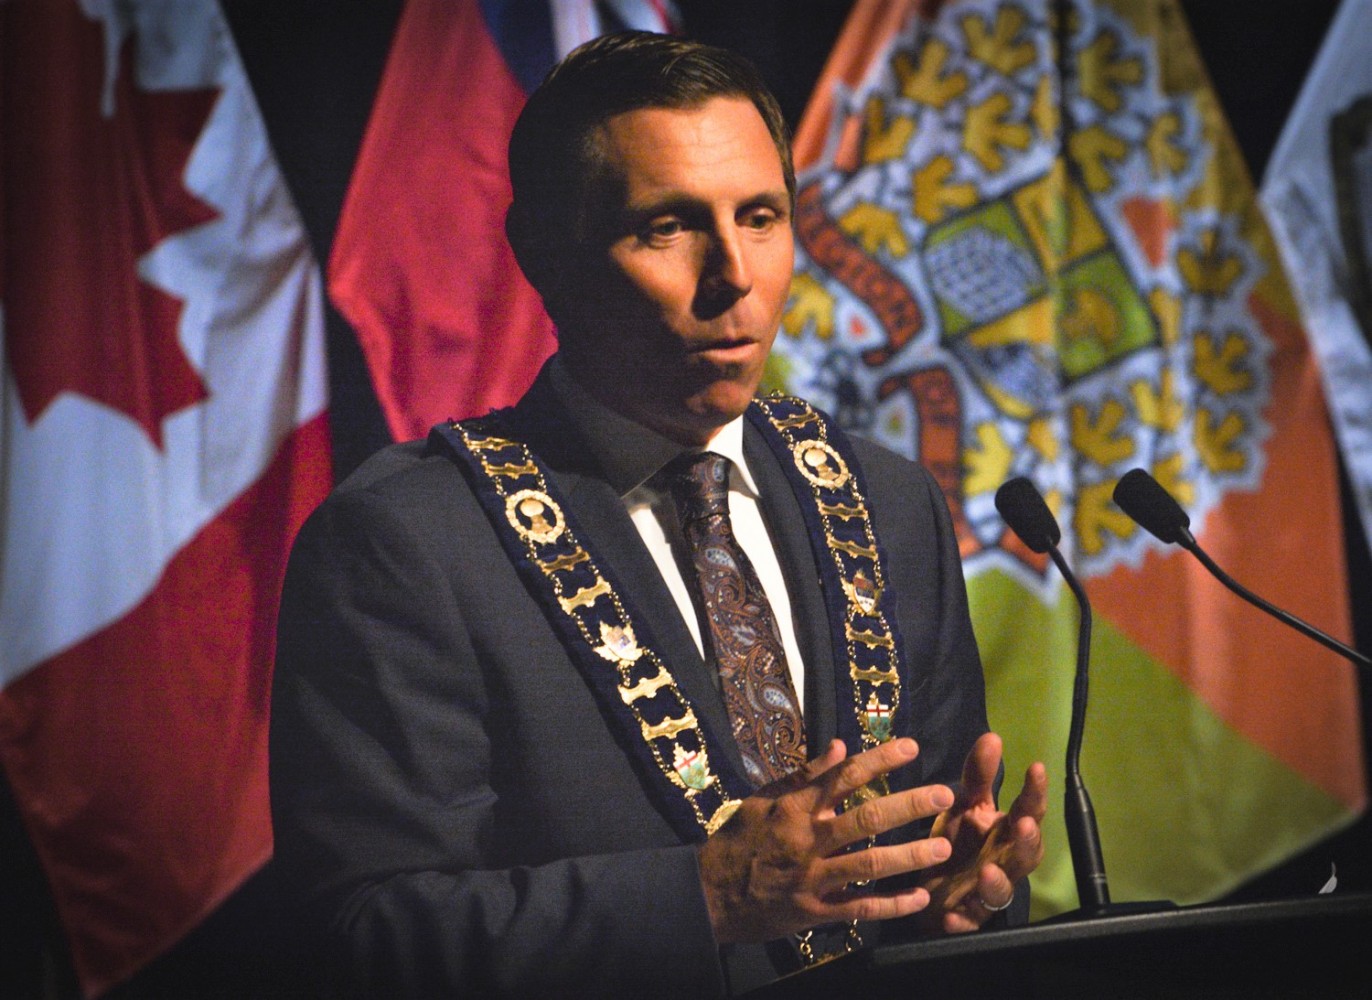 ‘A very high-level cover-up’: with mounting evidence of wrongdoing under his leadership Patrick Brown terminates sweeping City Hall forensic investigation